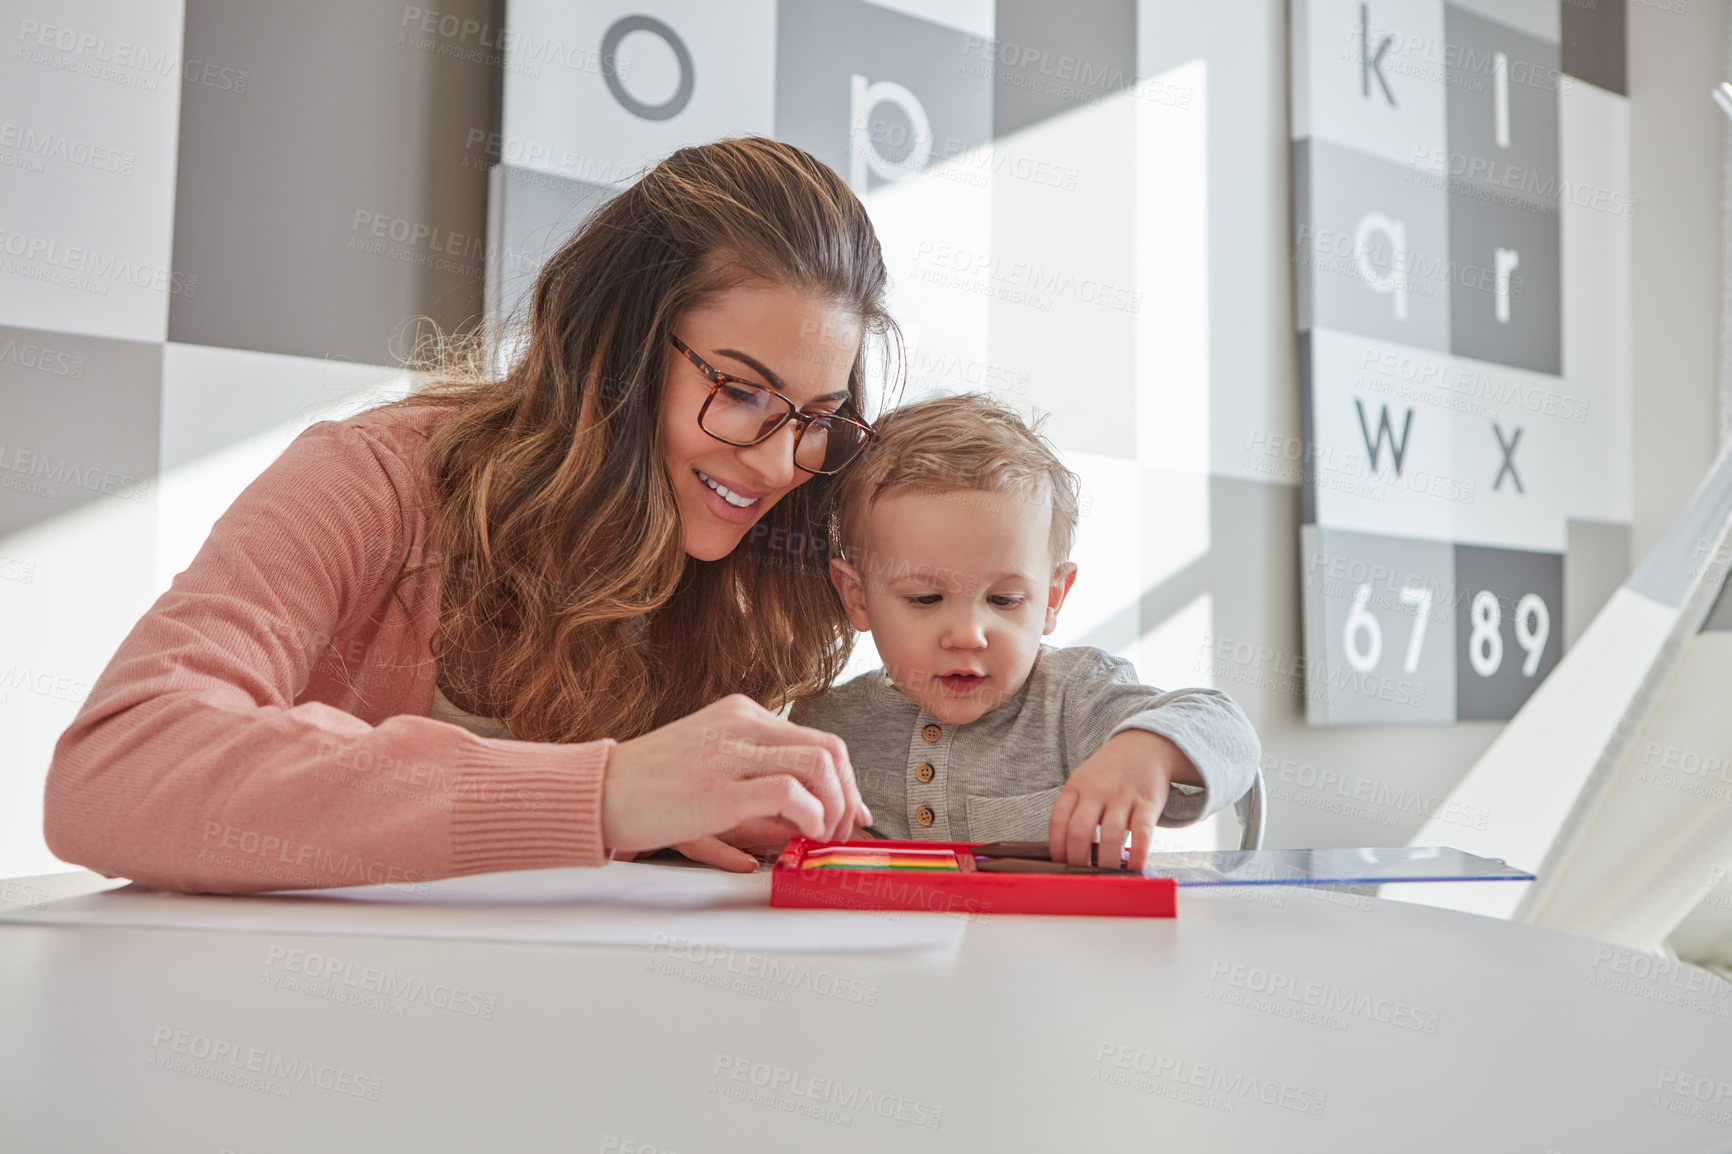 Buy stock photo Shot of a woman and her young son using crayons to draw at home